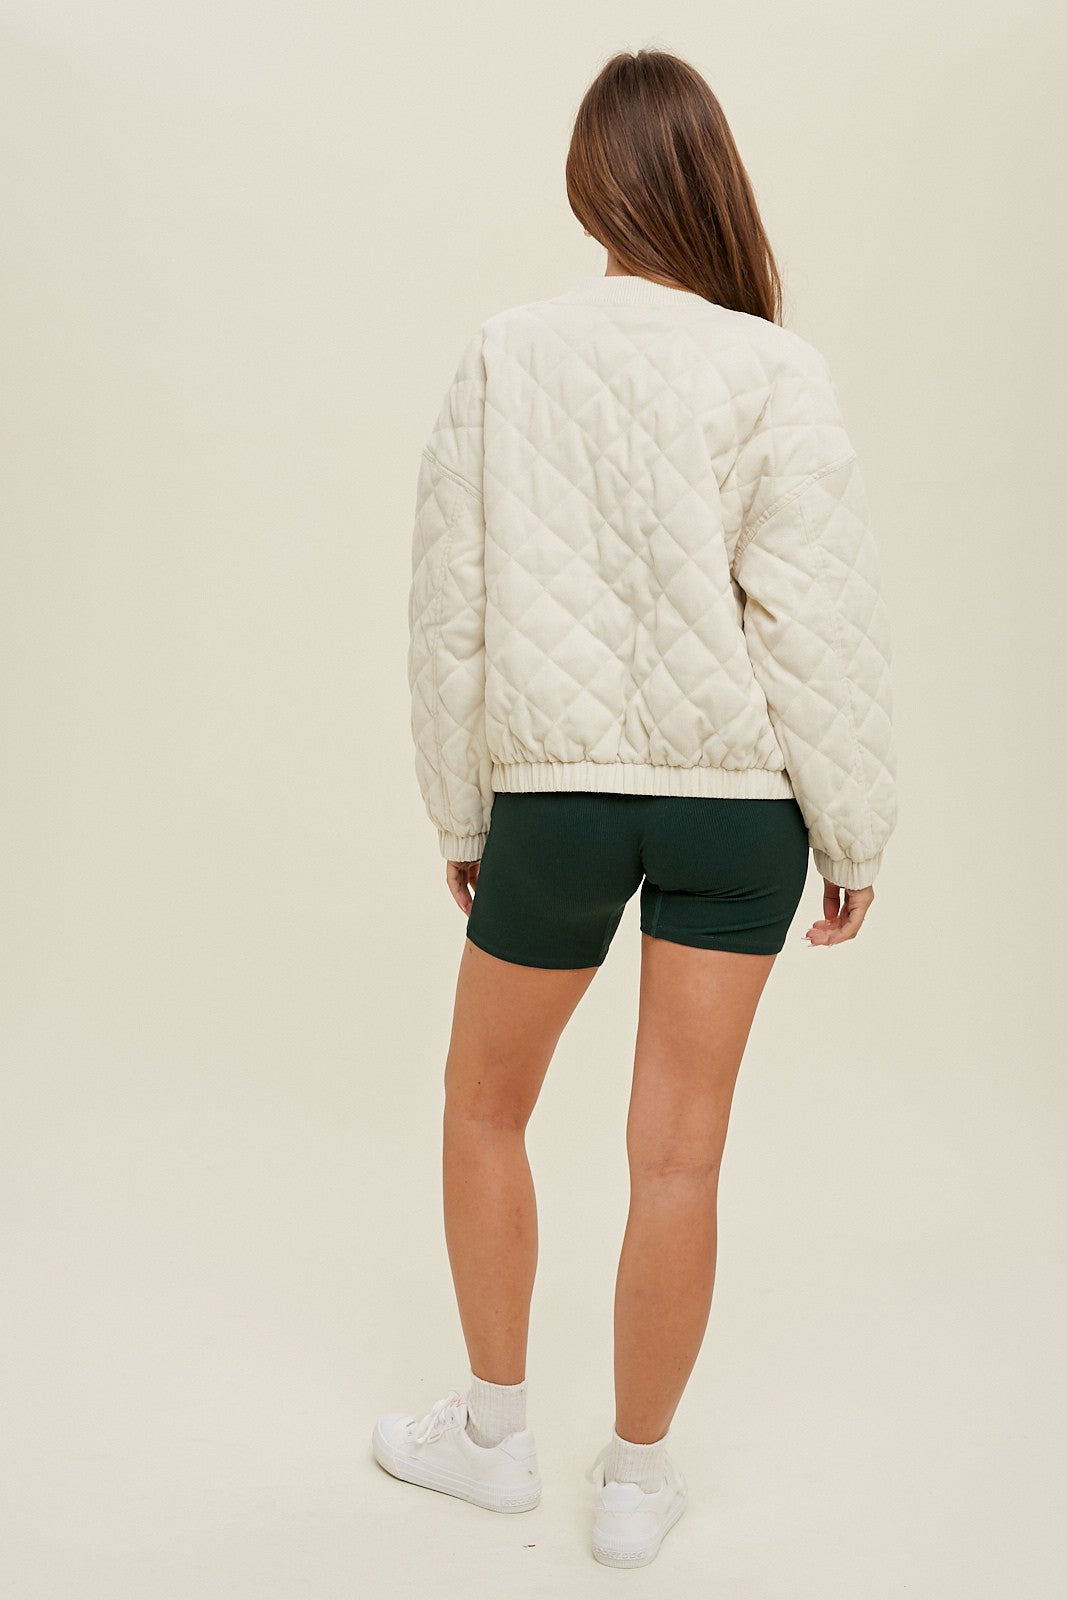 The Else Quilted Bomber Jacket